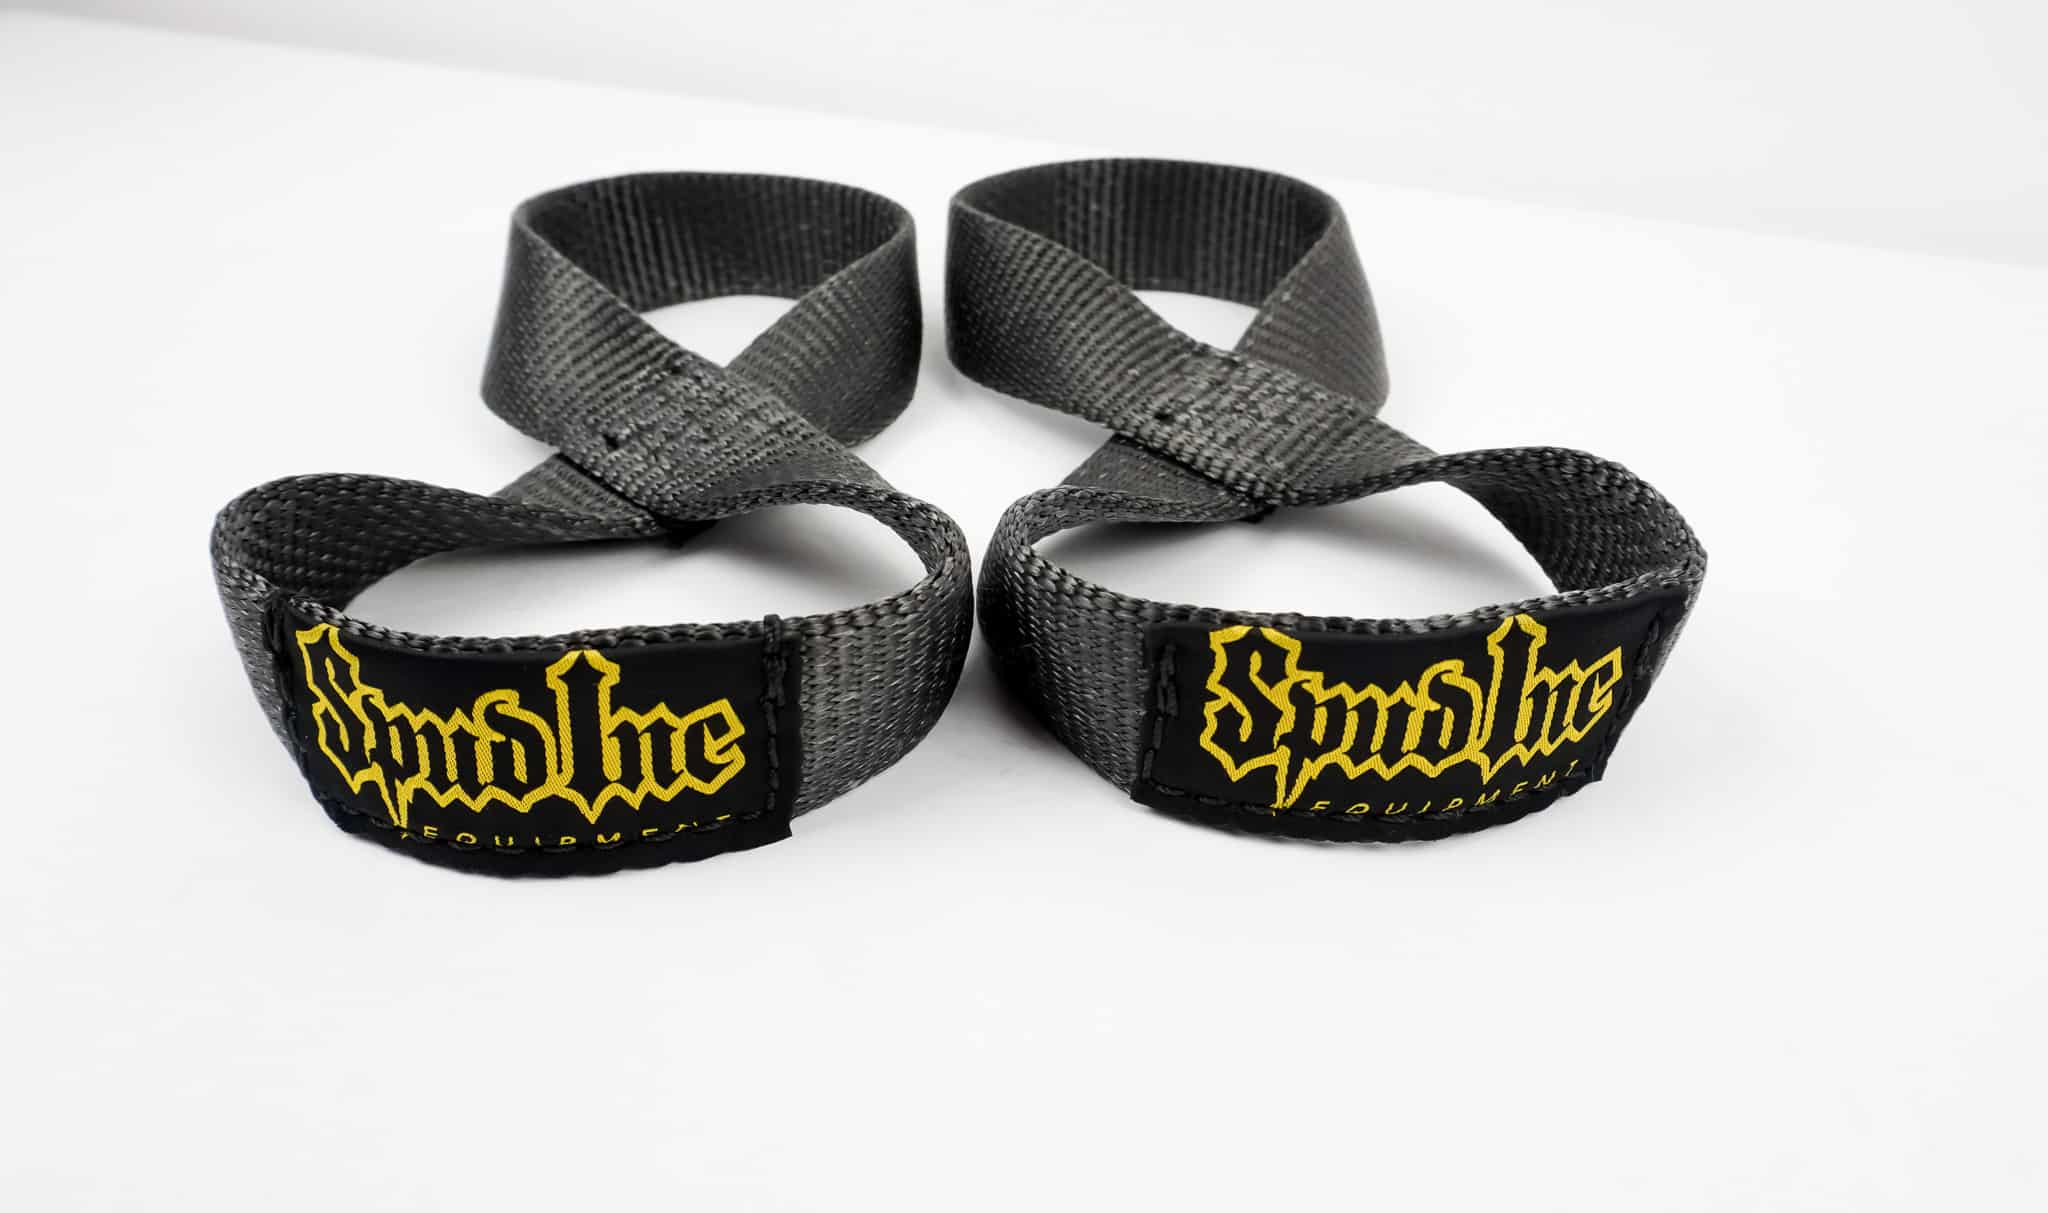 Extra Wide Lifting Straps - 2 wide - Strongman – Strength Shop USA